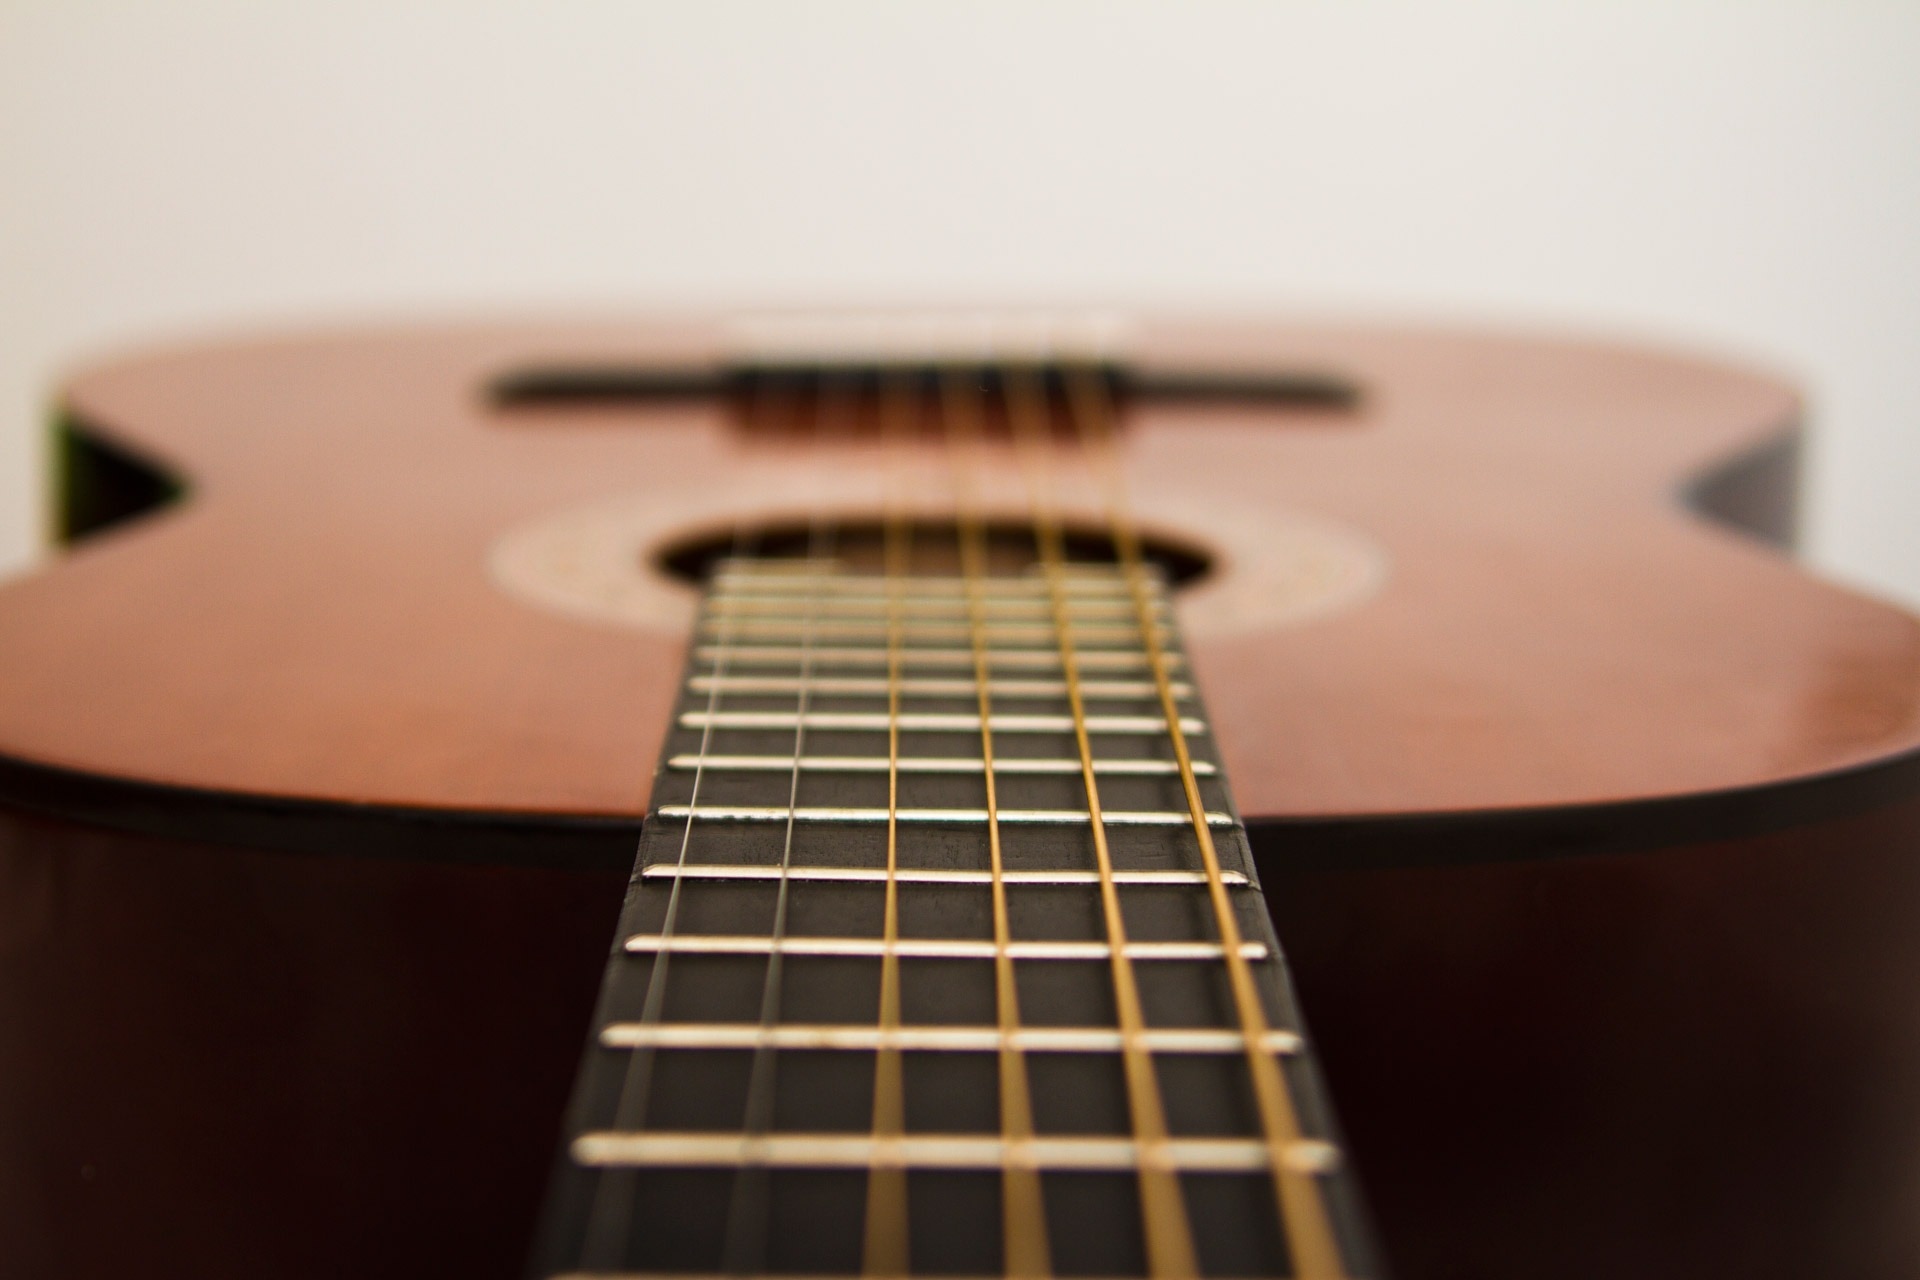 close up photo of dreadnought acoustic guitar